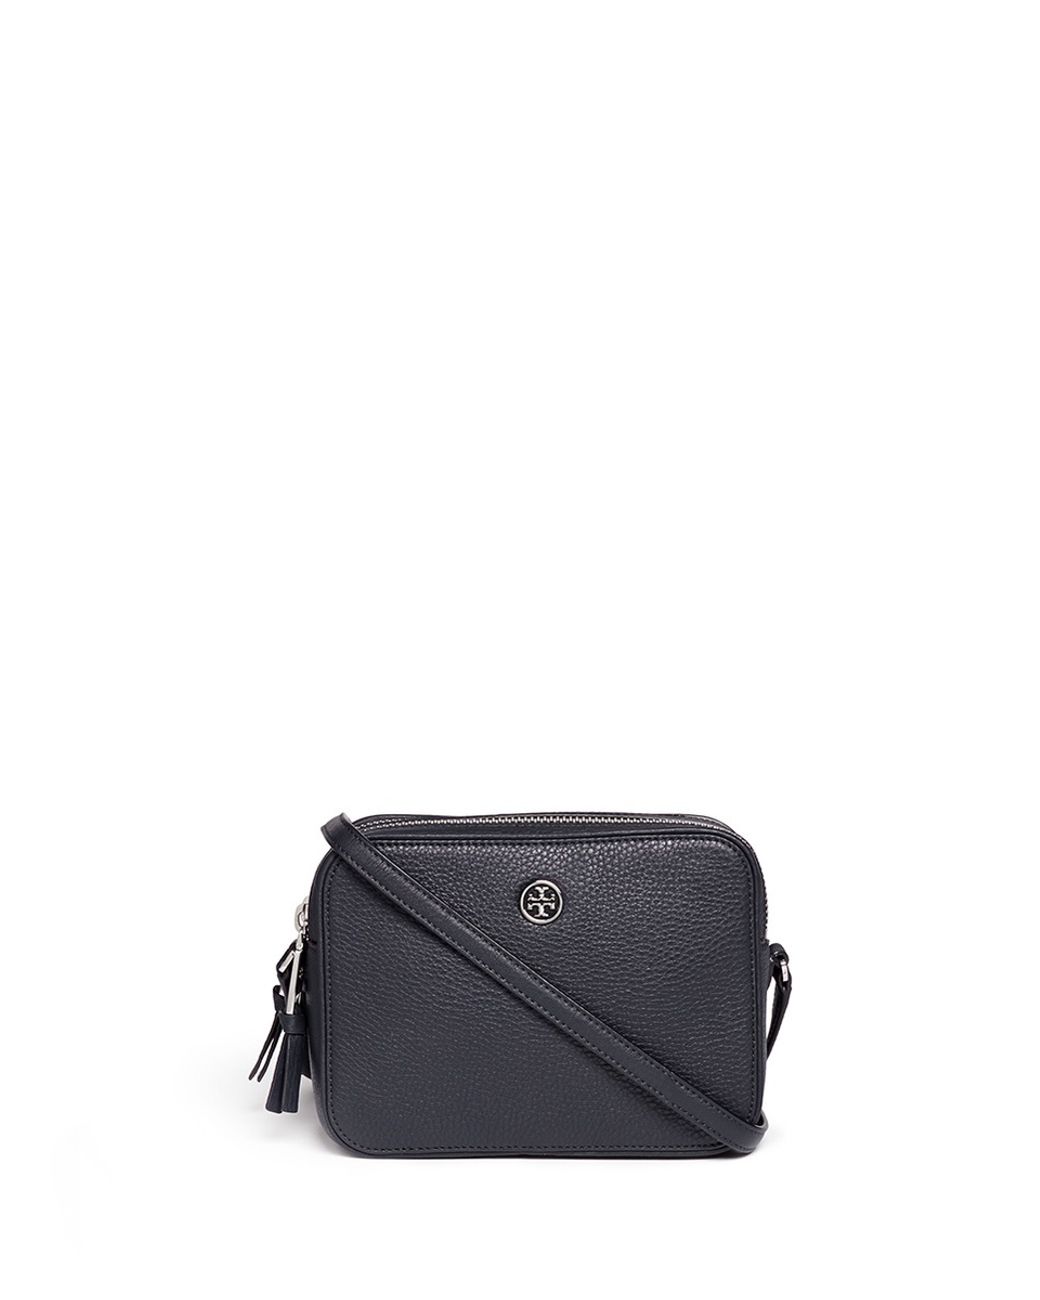 Tory Burch 'robinson' Double Zip Leather Crossbody Bag in Blue | Lyst